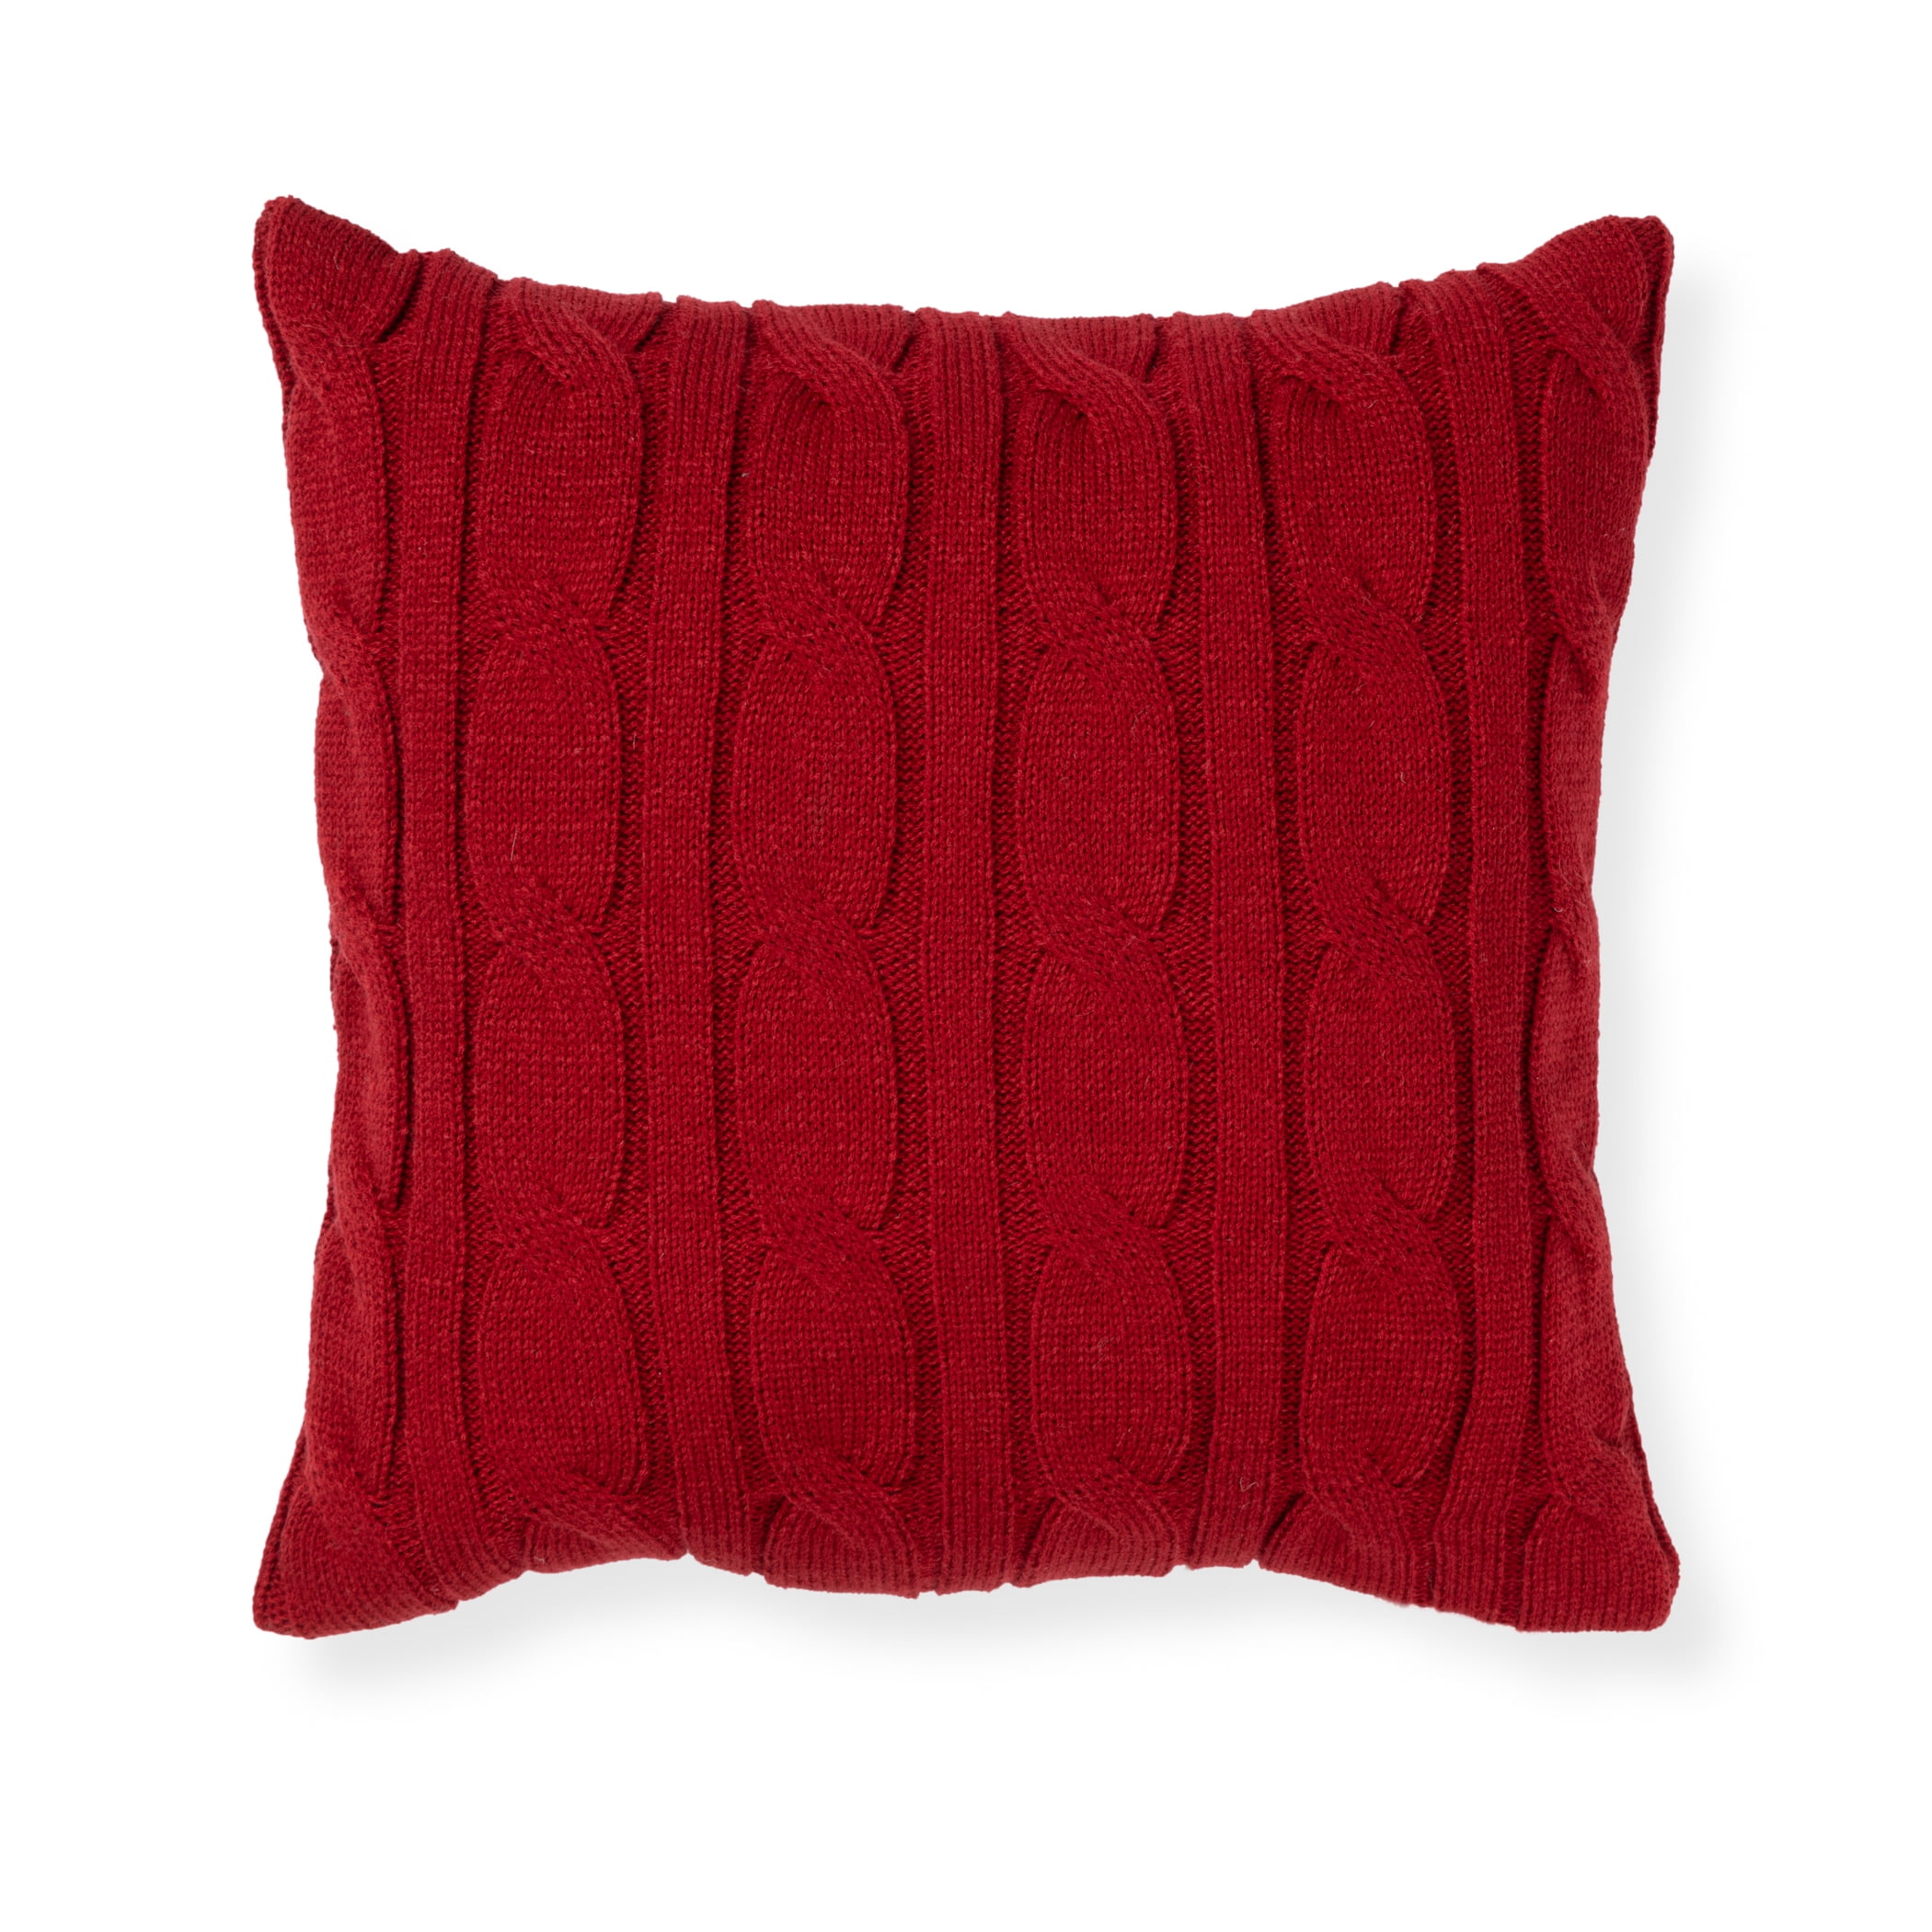 Mainstays Decorative Throw Pillow, Holiday Sweater Knit, 17"x17" Square, Single Pillow